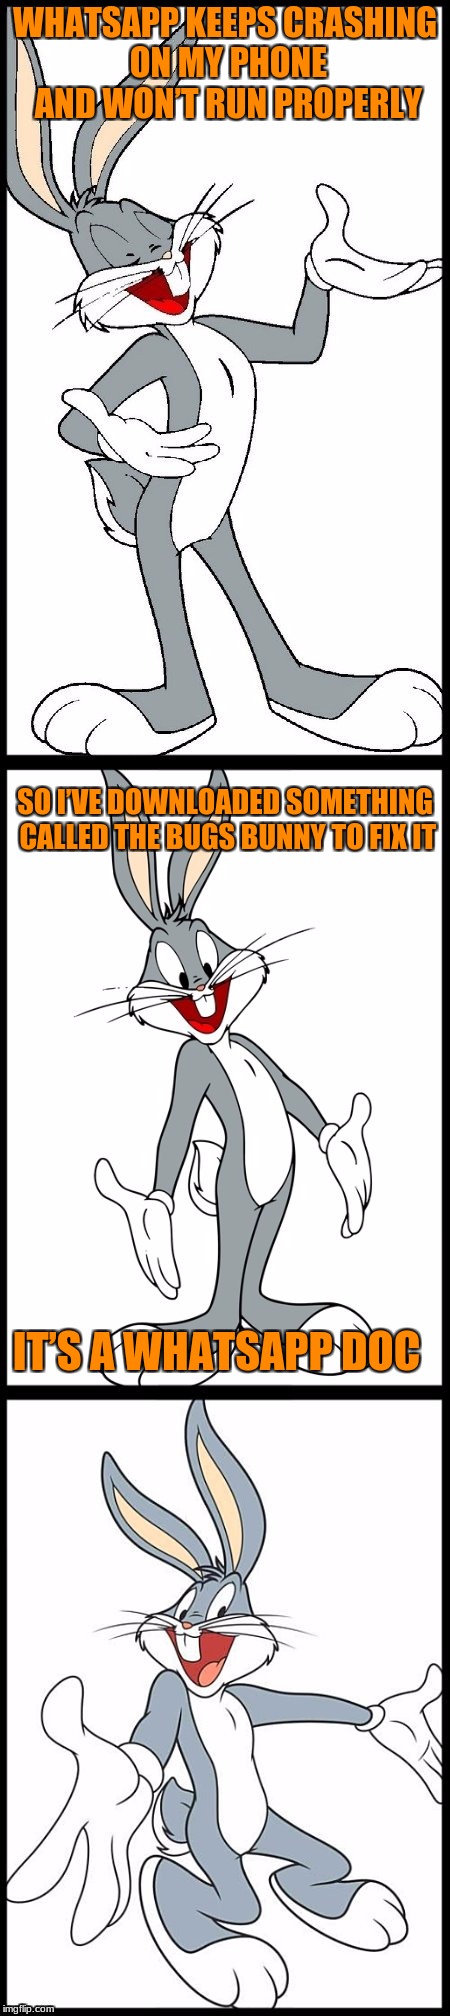 Bad Bugs Bunny Pun | WHATSAPP KEEPS CRASHING ON MY PHONE AND WON’T RUN PROPERLY; SO I’VE DOWNLOADED SOMETHING CALLED THE BUGS BUNNY TO FIX IT; IT’S A WHATSAPP DOC | image tagged in bad bugs bunny pun | made w/ Imgflip meme maker